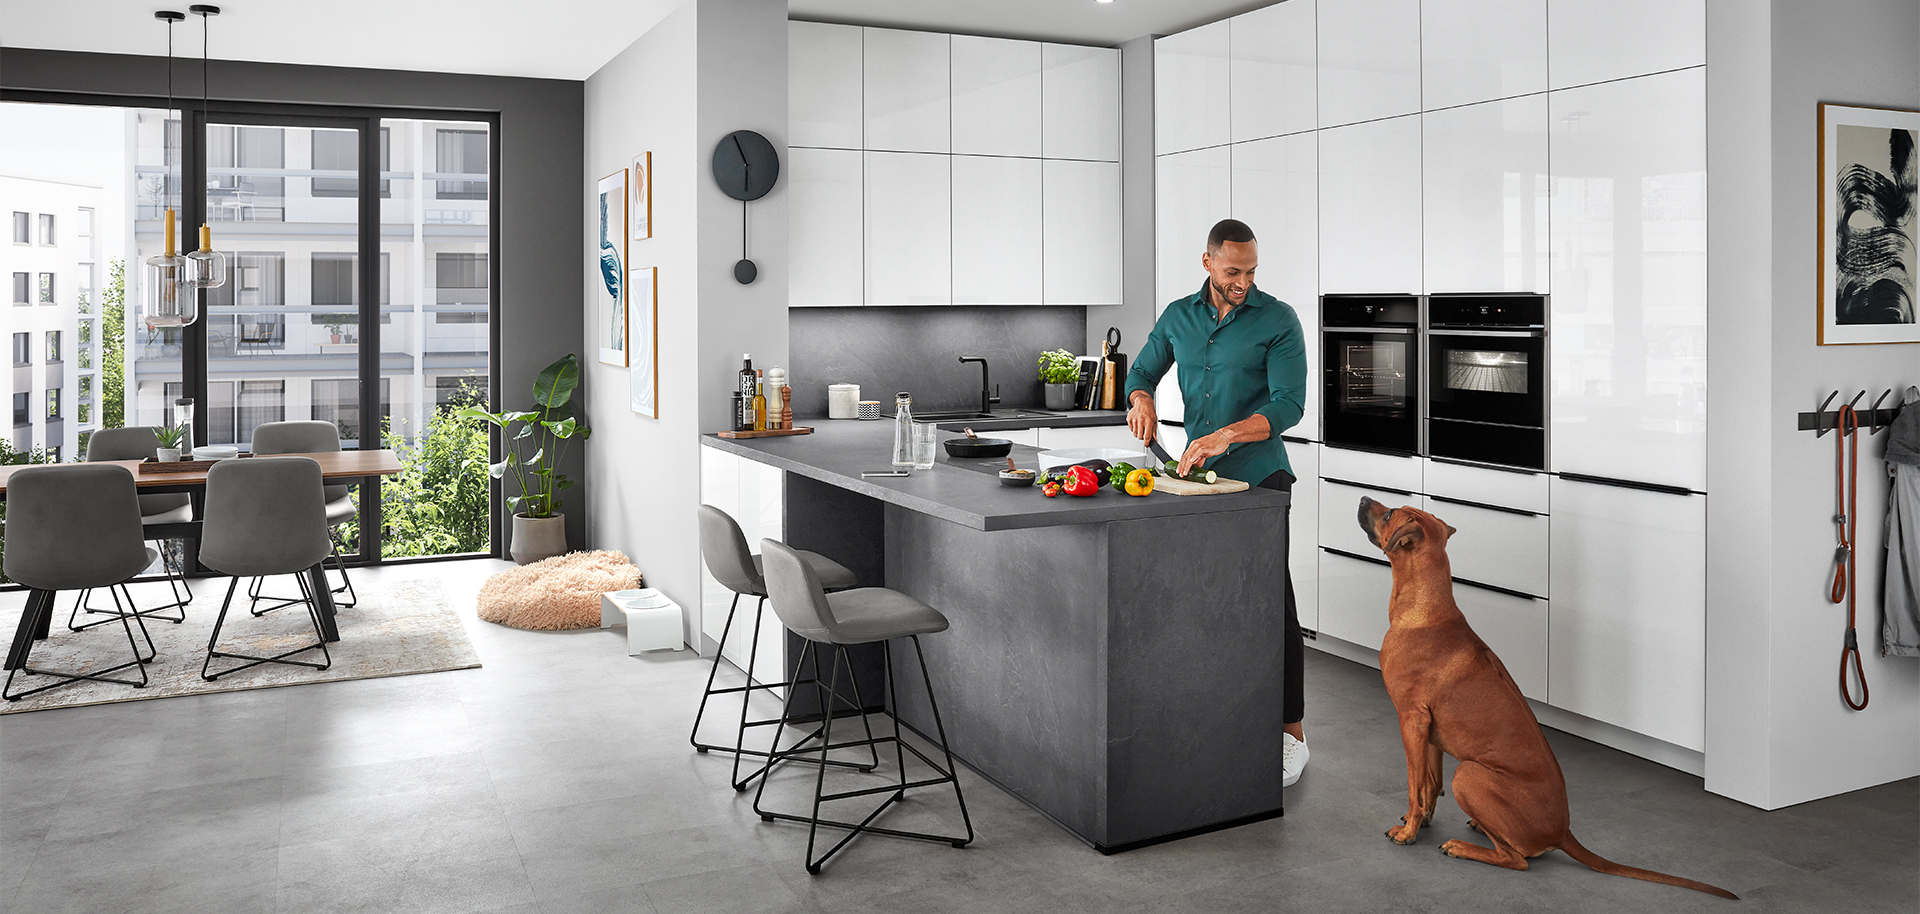 A stylish modern kitchen scene featuring a man preparing food on an island counter with a dog watching, reflecting a comfortable, contemporary home lifestyle.